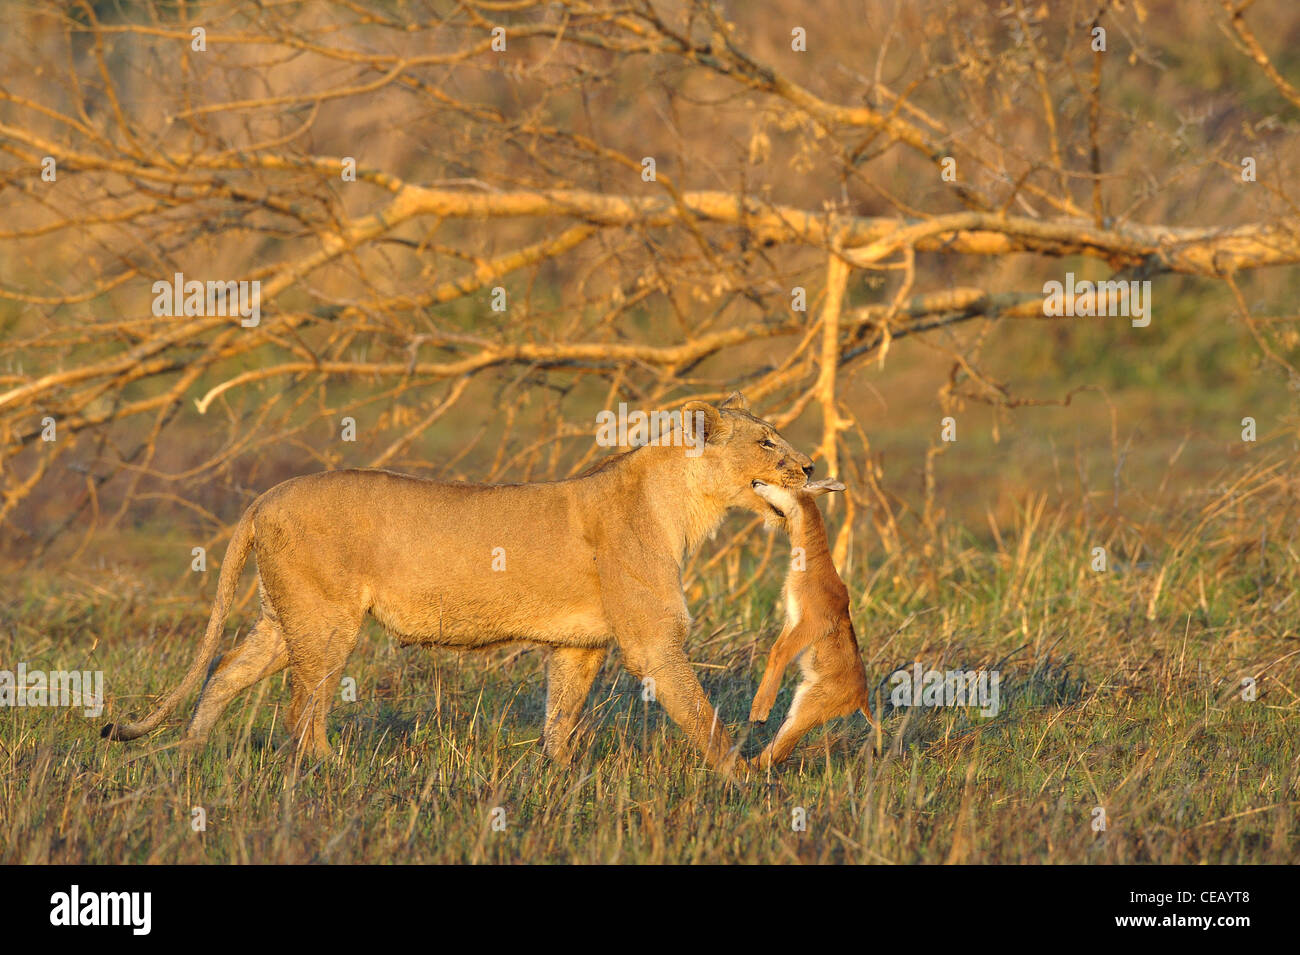 A lioness with new-born antelope prey. Stock Photo